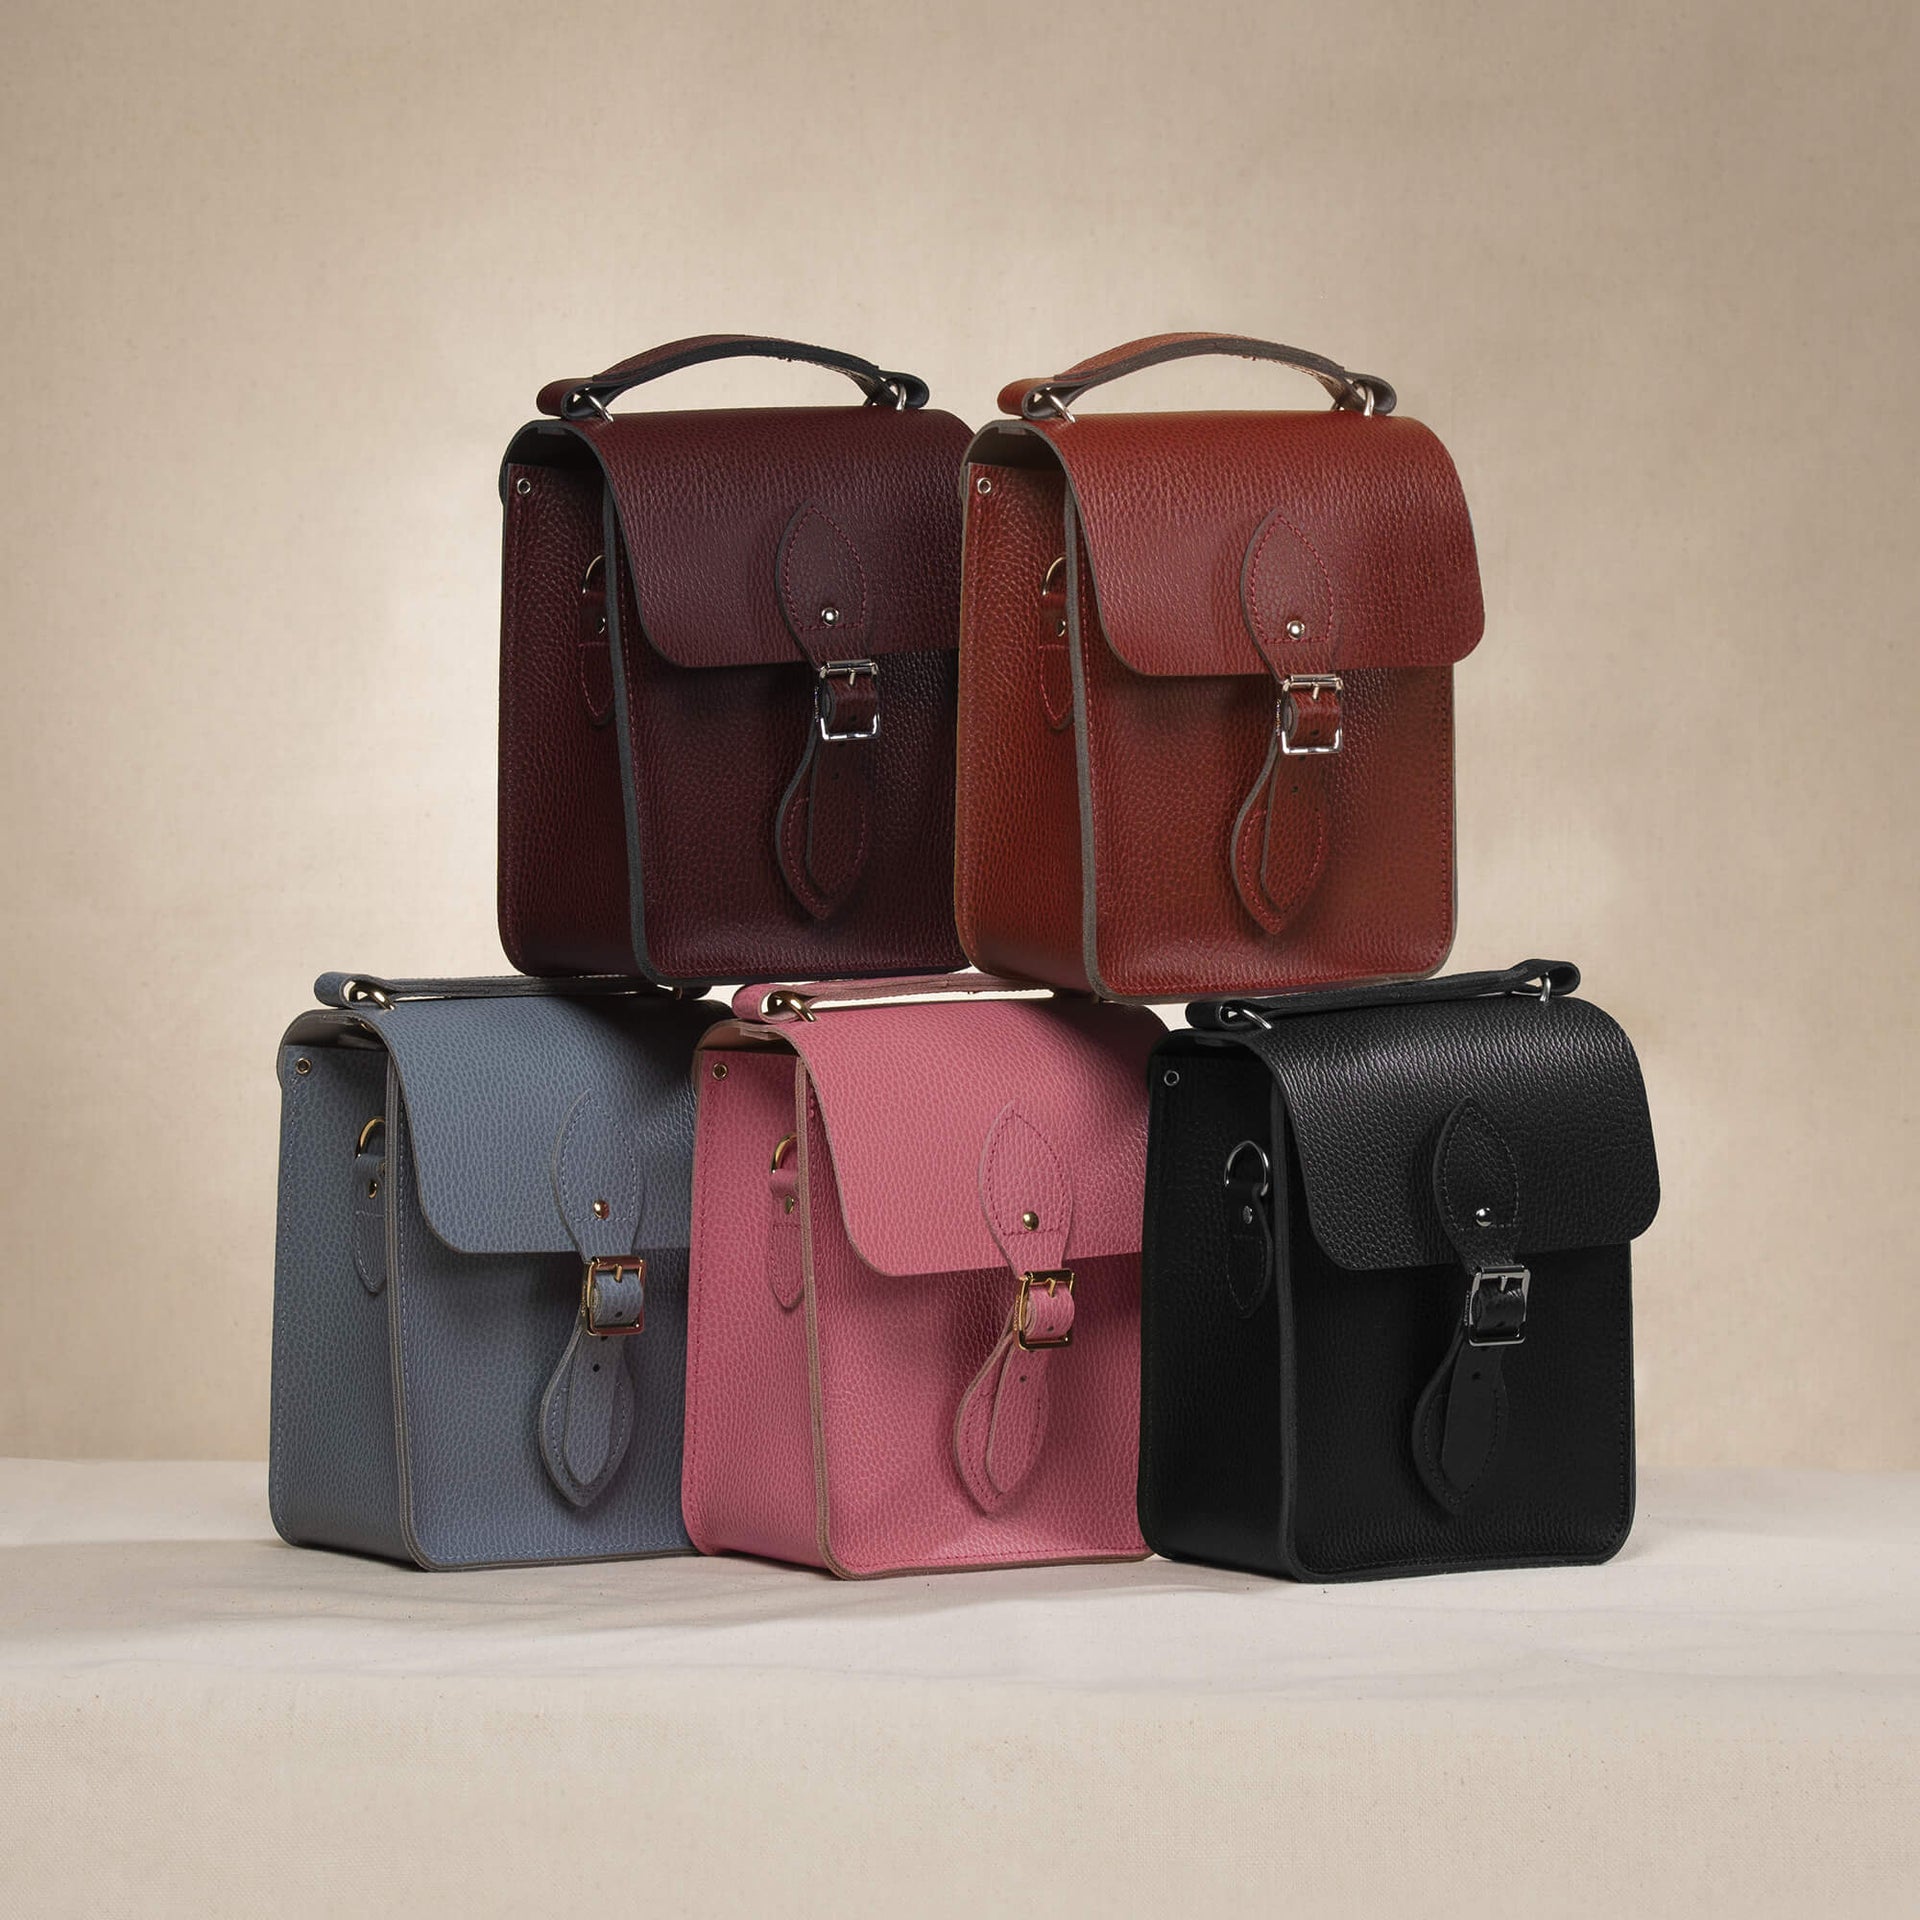 Introducing The Binocular Bag and our Reinvented Small Goods - The Cambridge Satchel Company EU Store